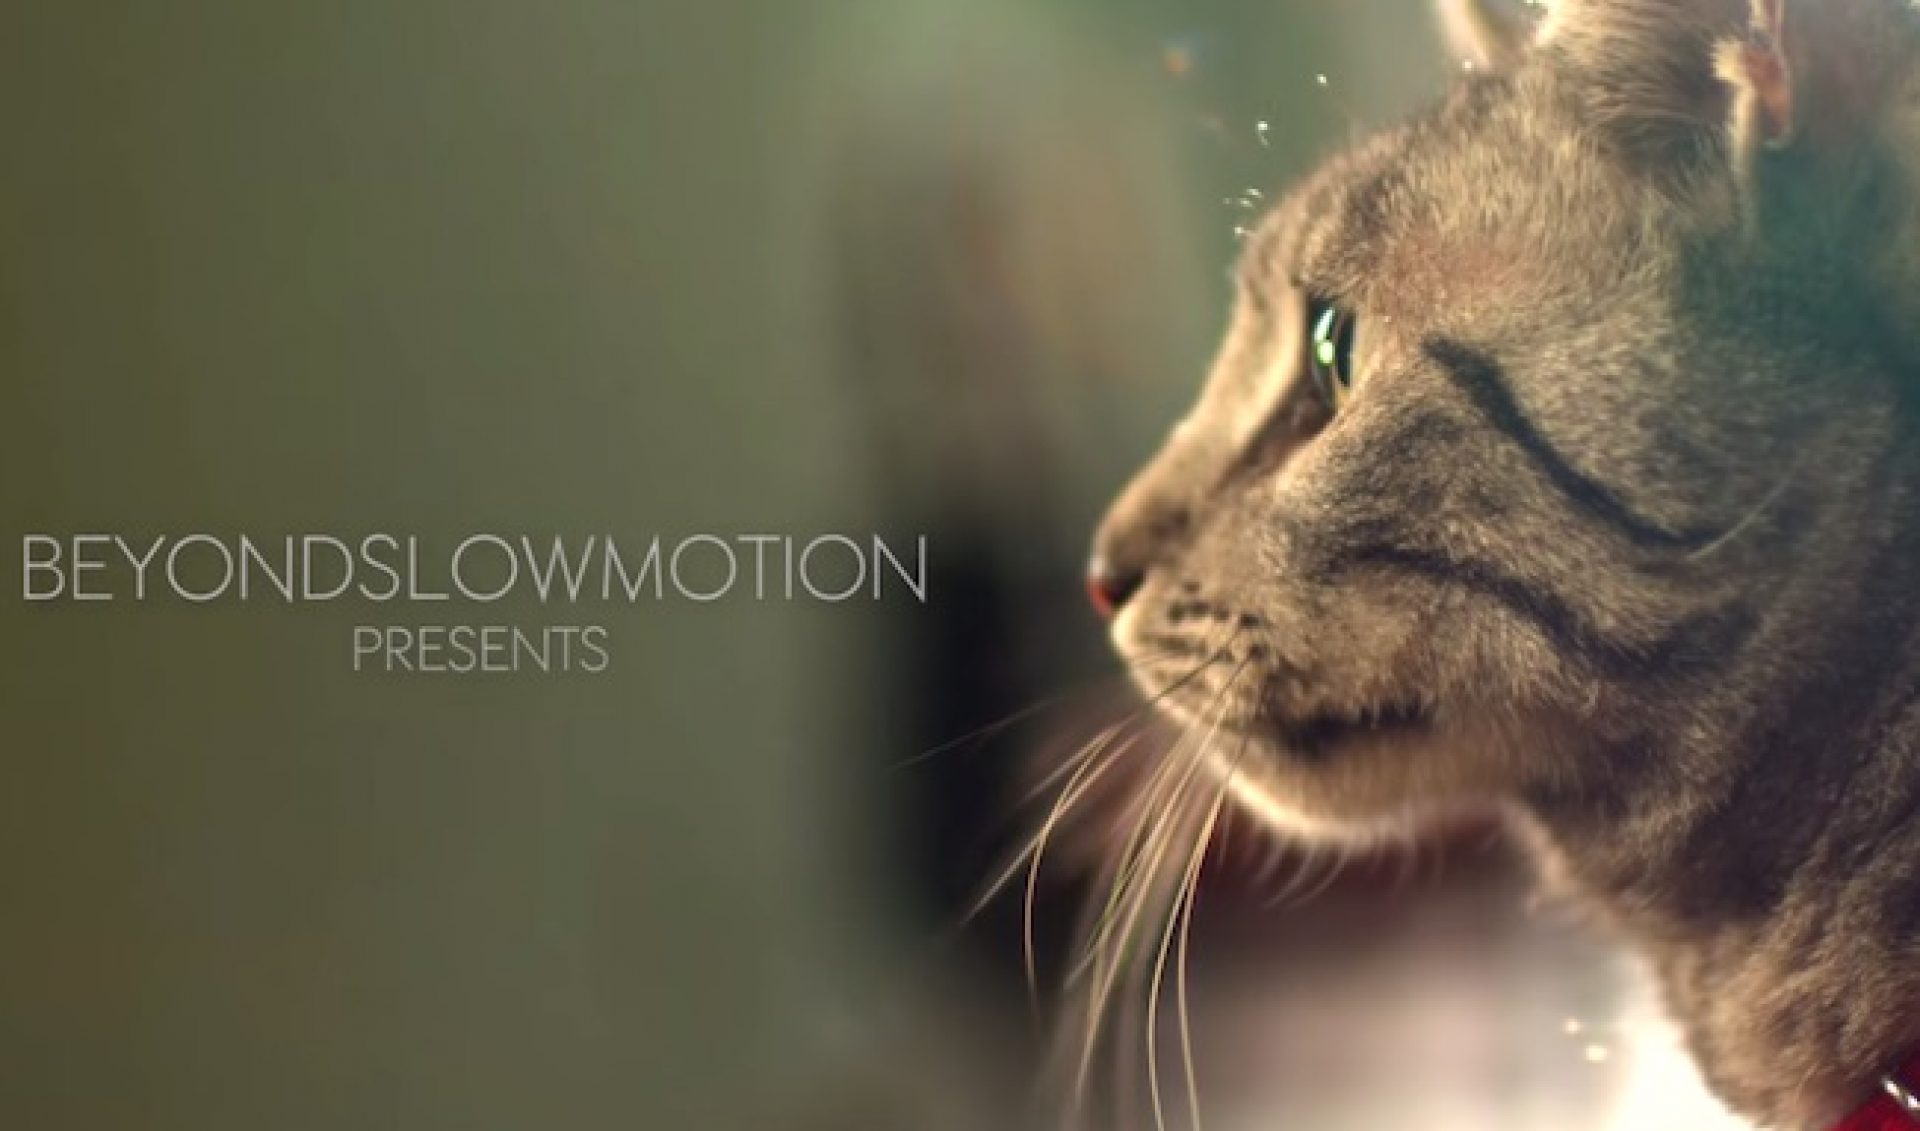 Purina Teams With BeyondSlowMotion For Branded Cat Video Campaign